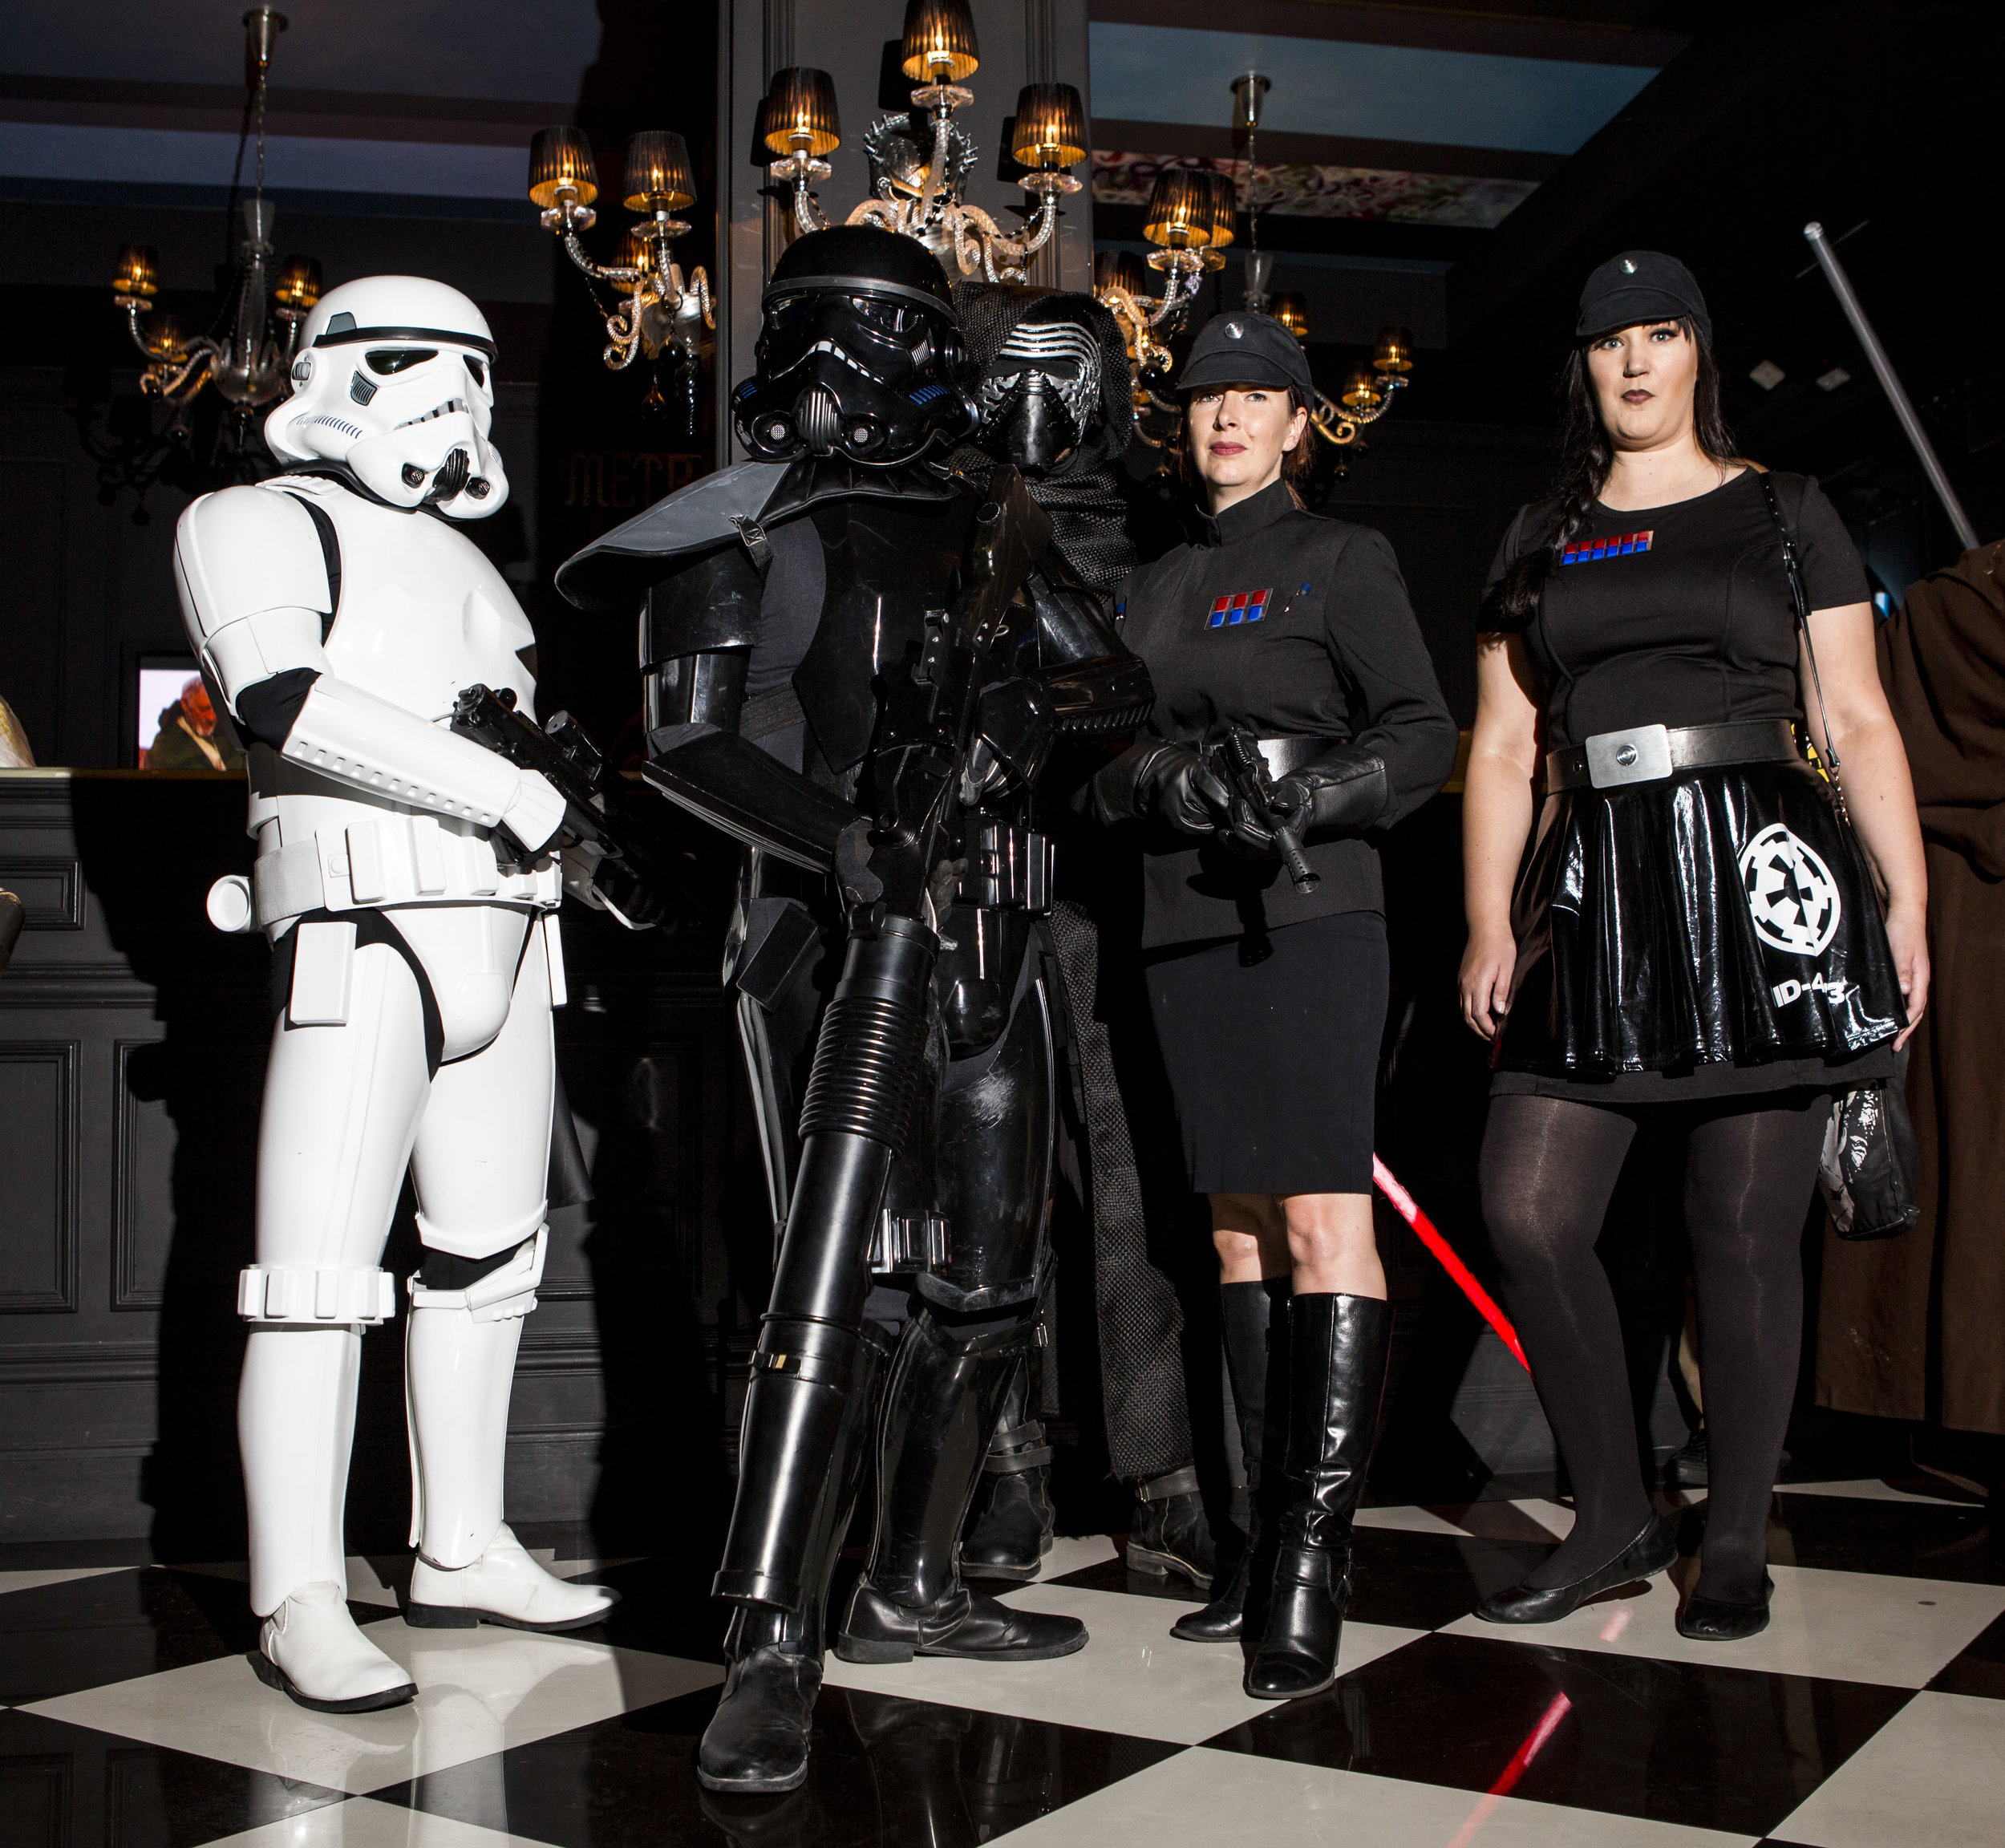  Star Wars fans from the Neon City Garrison - 501st Legion celebrate the 40th anniversary of the release of Episode IV – A New Hope at the Millennium Fandom Bar in the Arts District on Thursday, May 25, 2017. Patrick Connolly Las Vegas Review-Journal